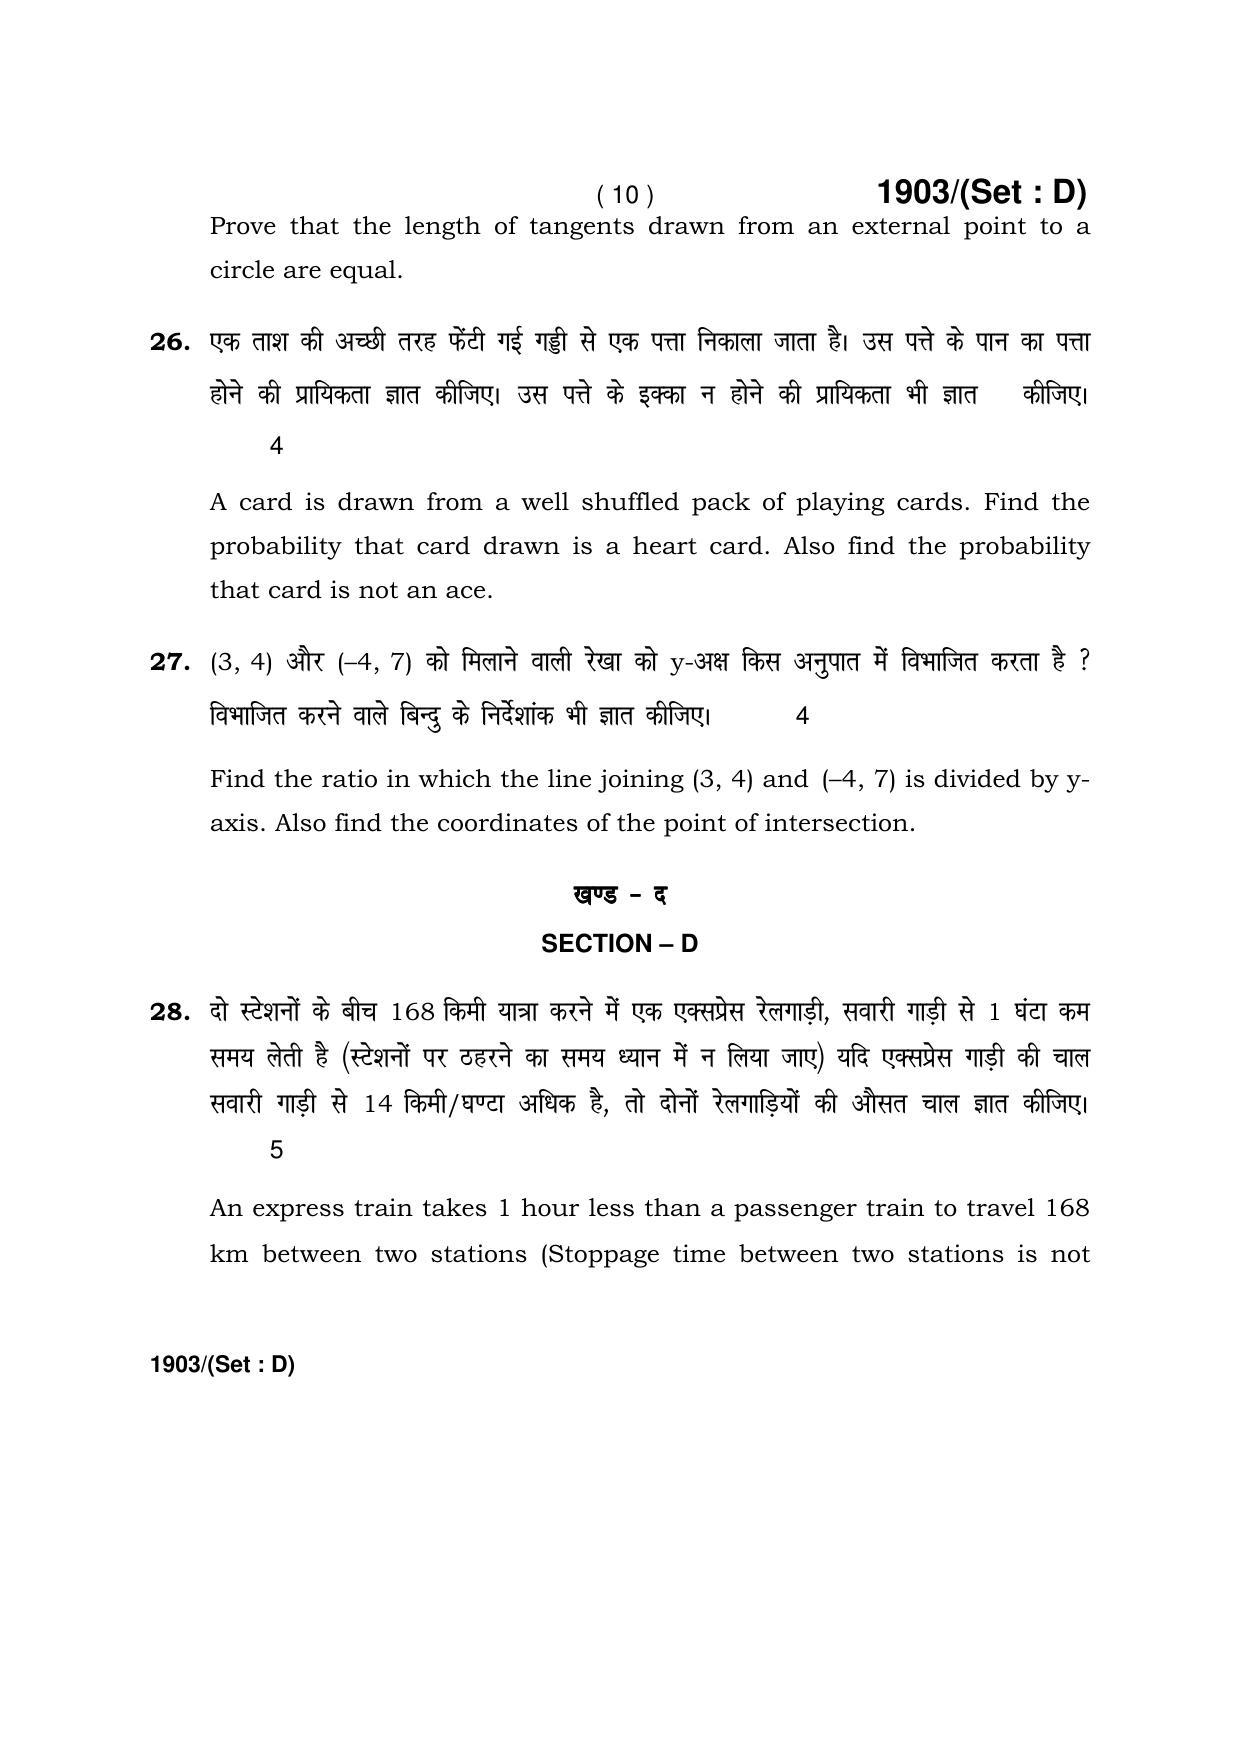 Haryana Board HBSE Class 10 Mathematics -D 2017 Question Paper - Page 10